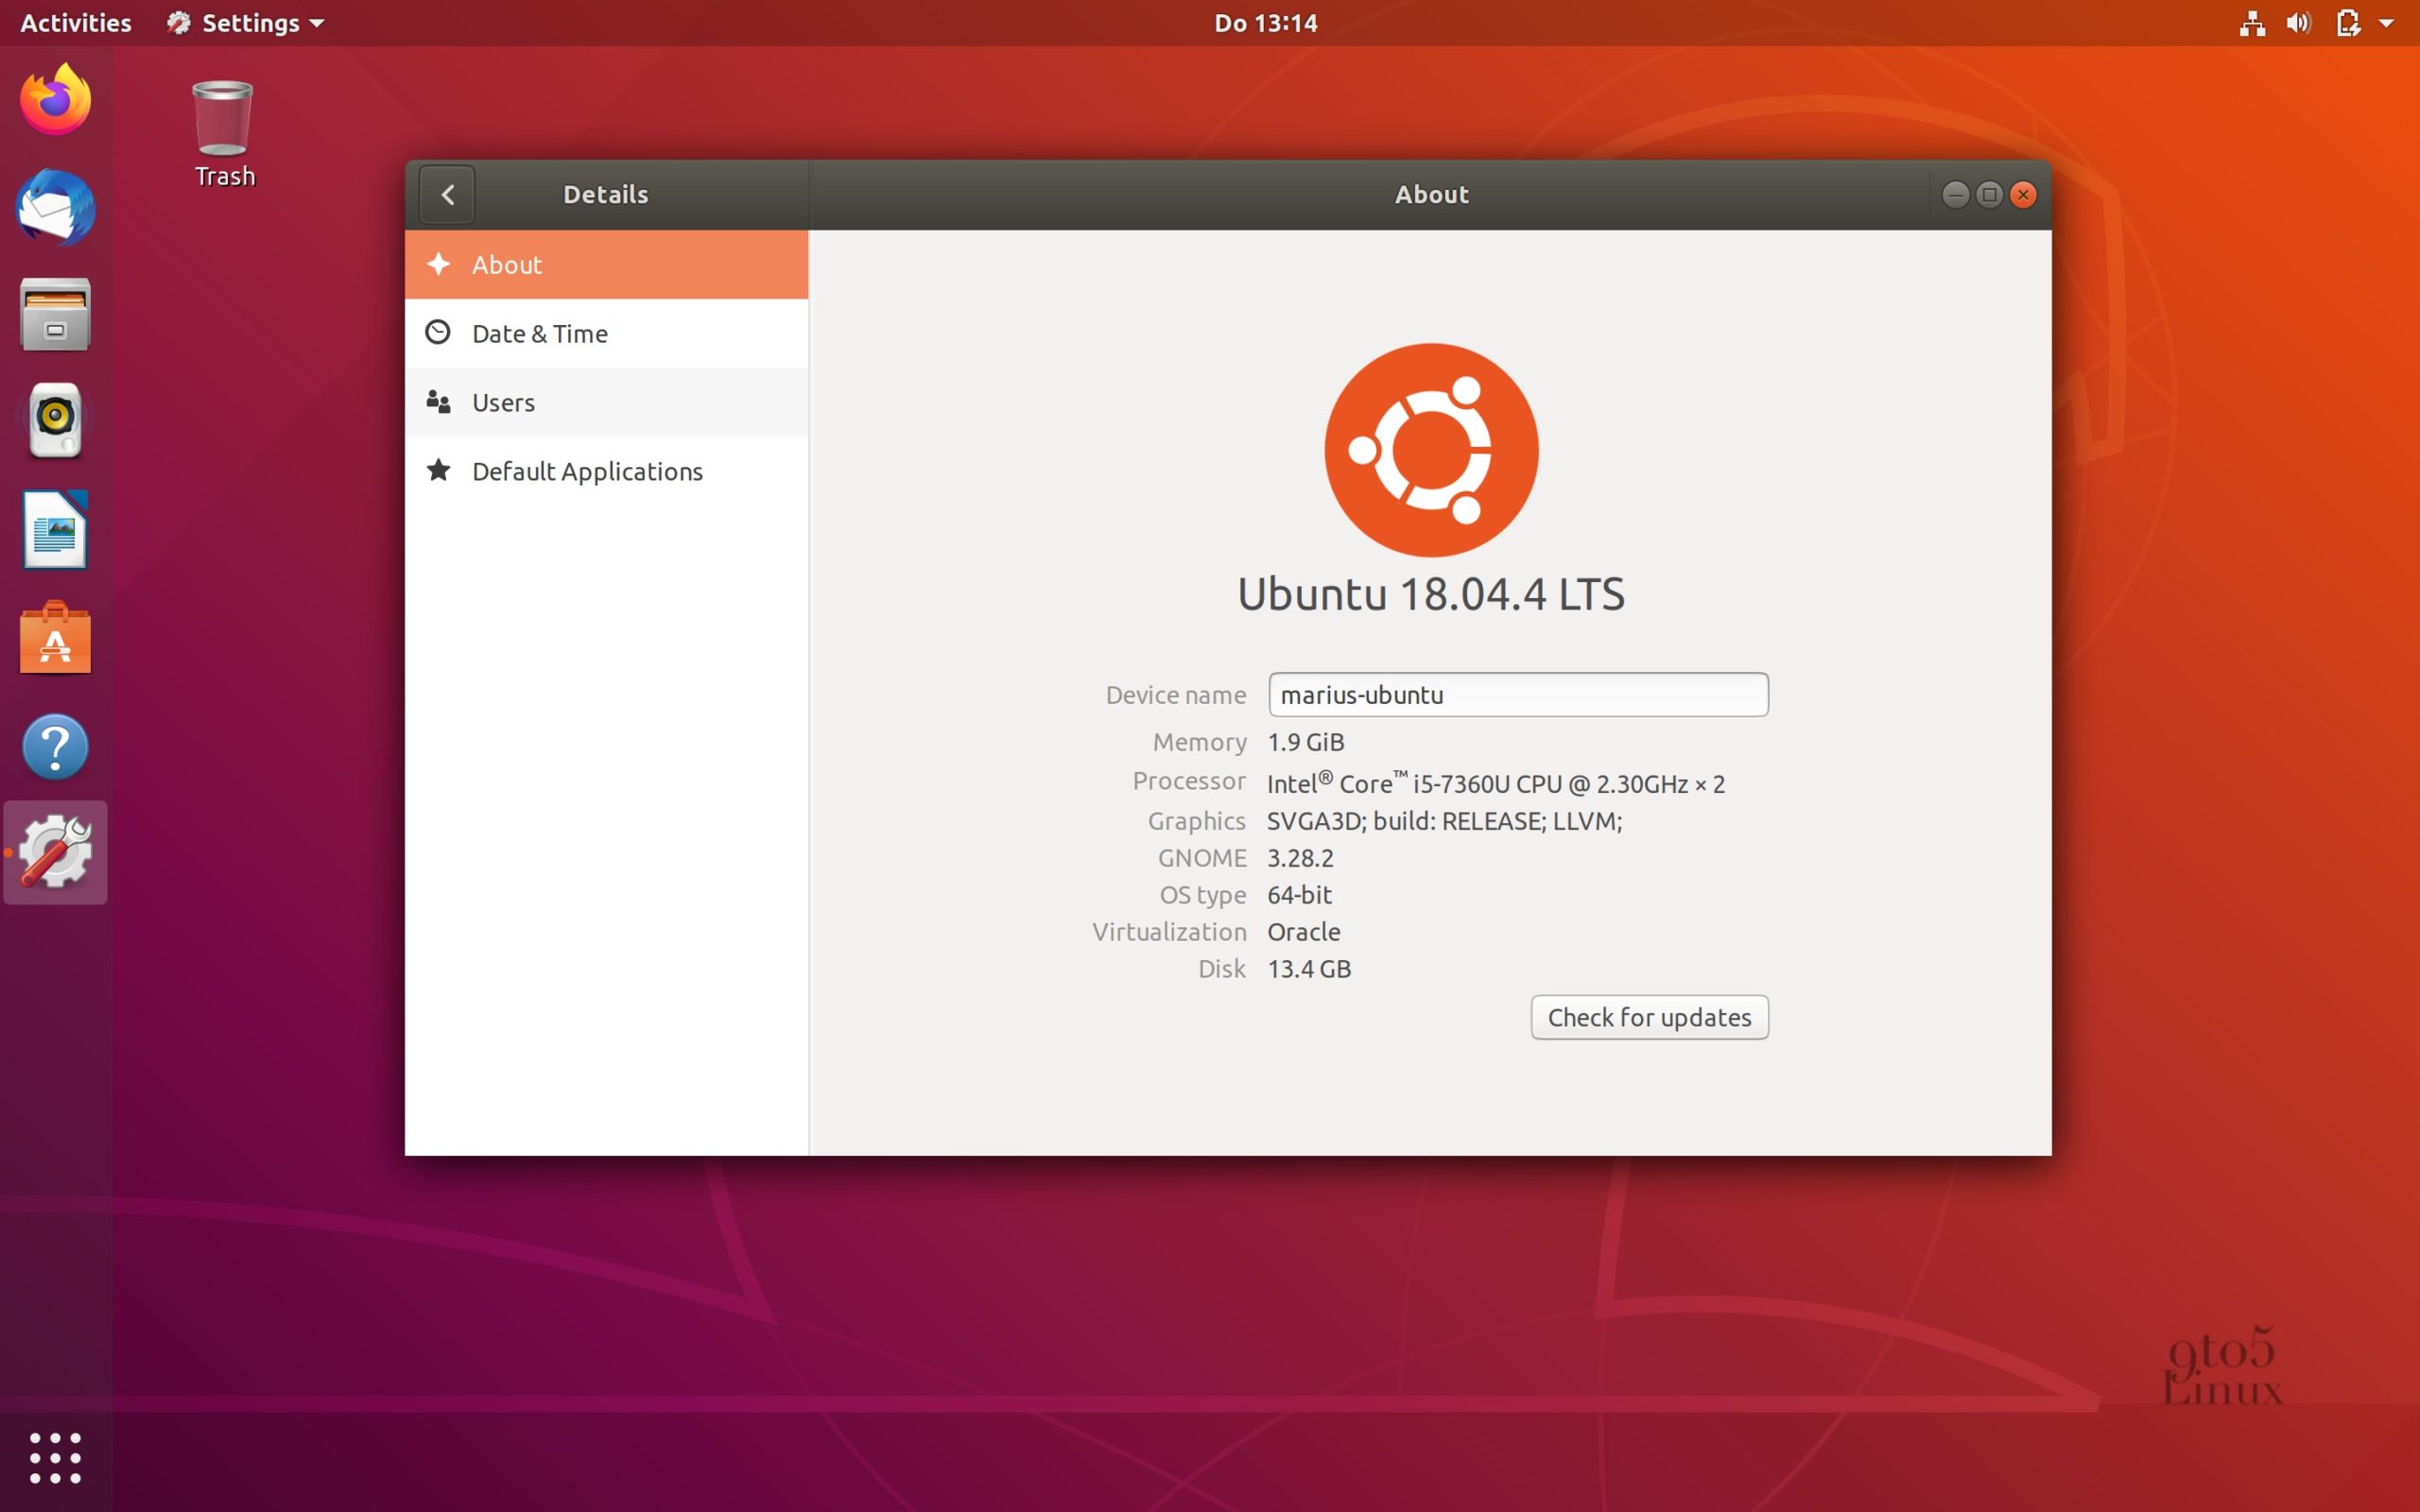 Ubuntu 18.04.4 LTS Released with Linux Kernel 5.3, Download Now